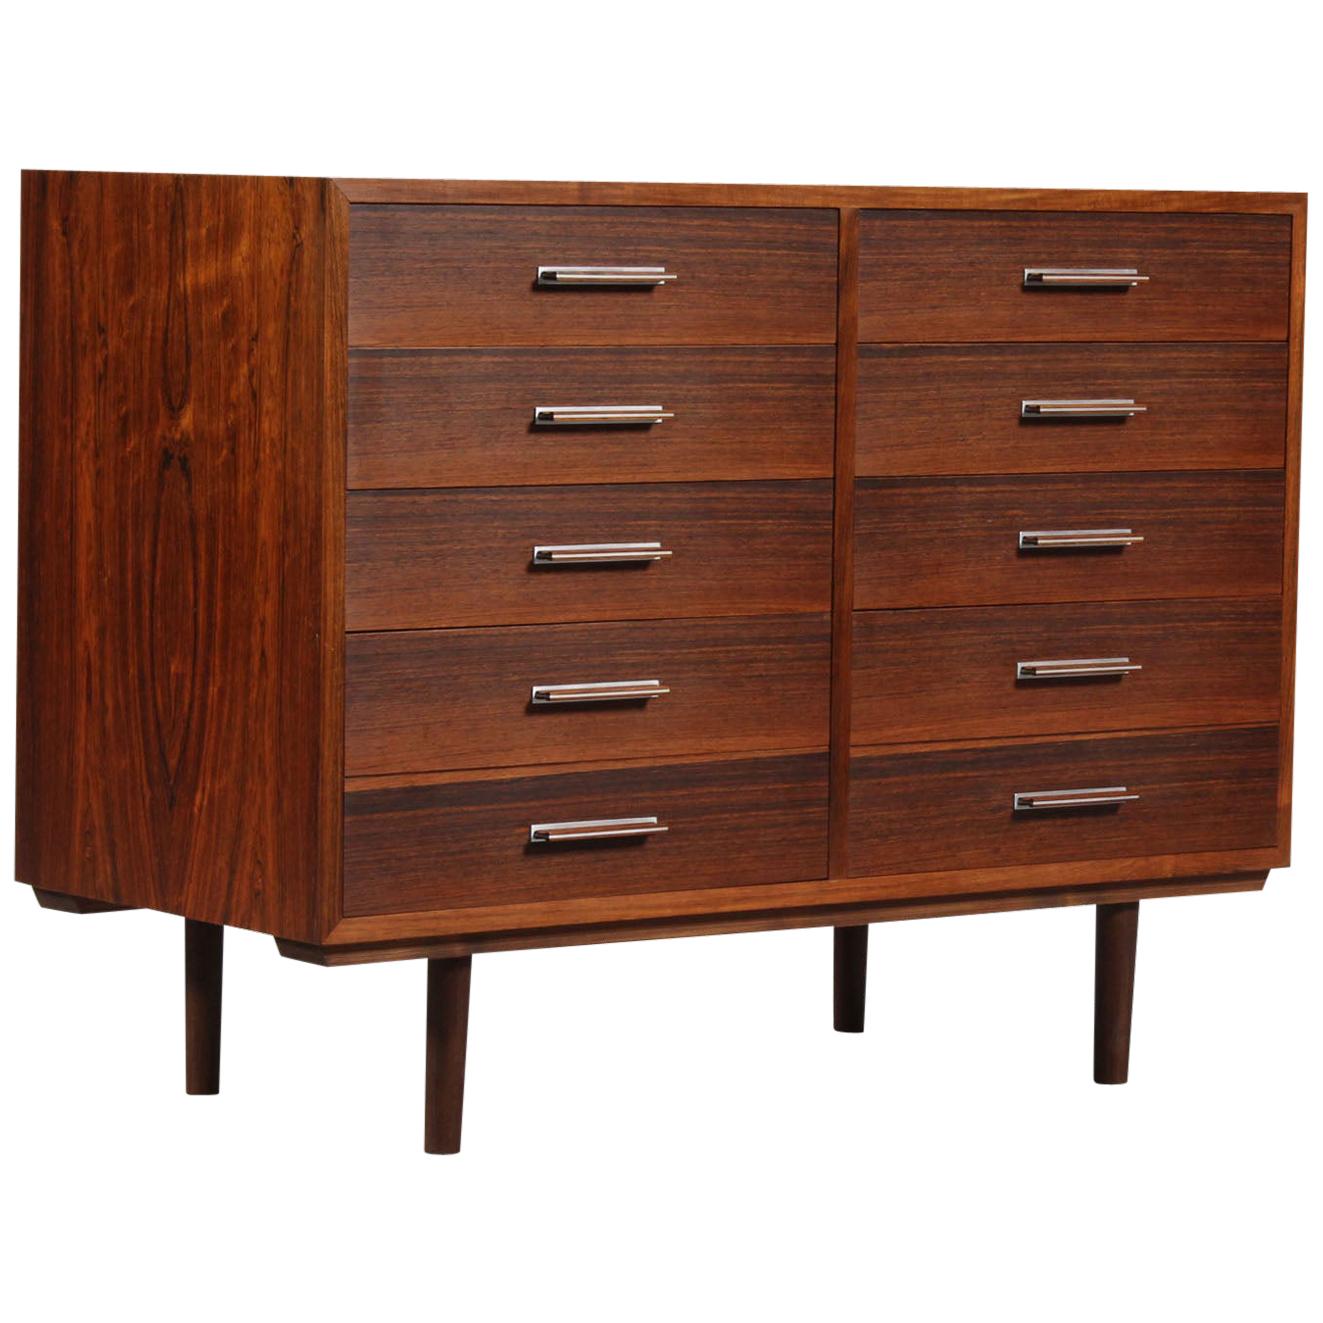 Rosewood Chest of 8 Drawers by Axel Christiansen for ACD Mobler